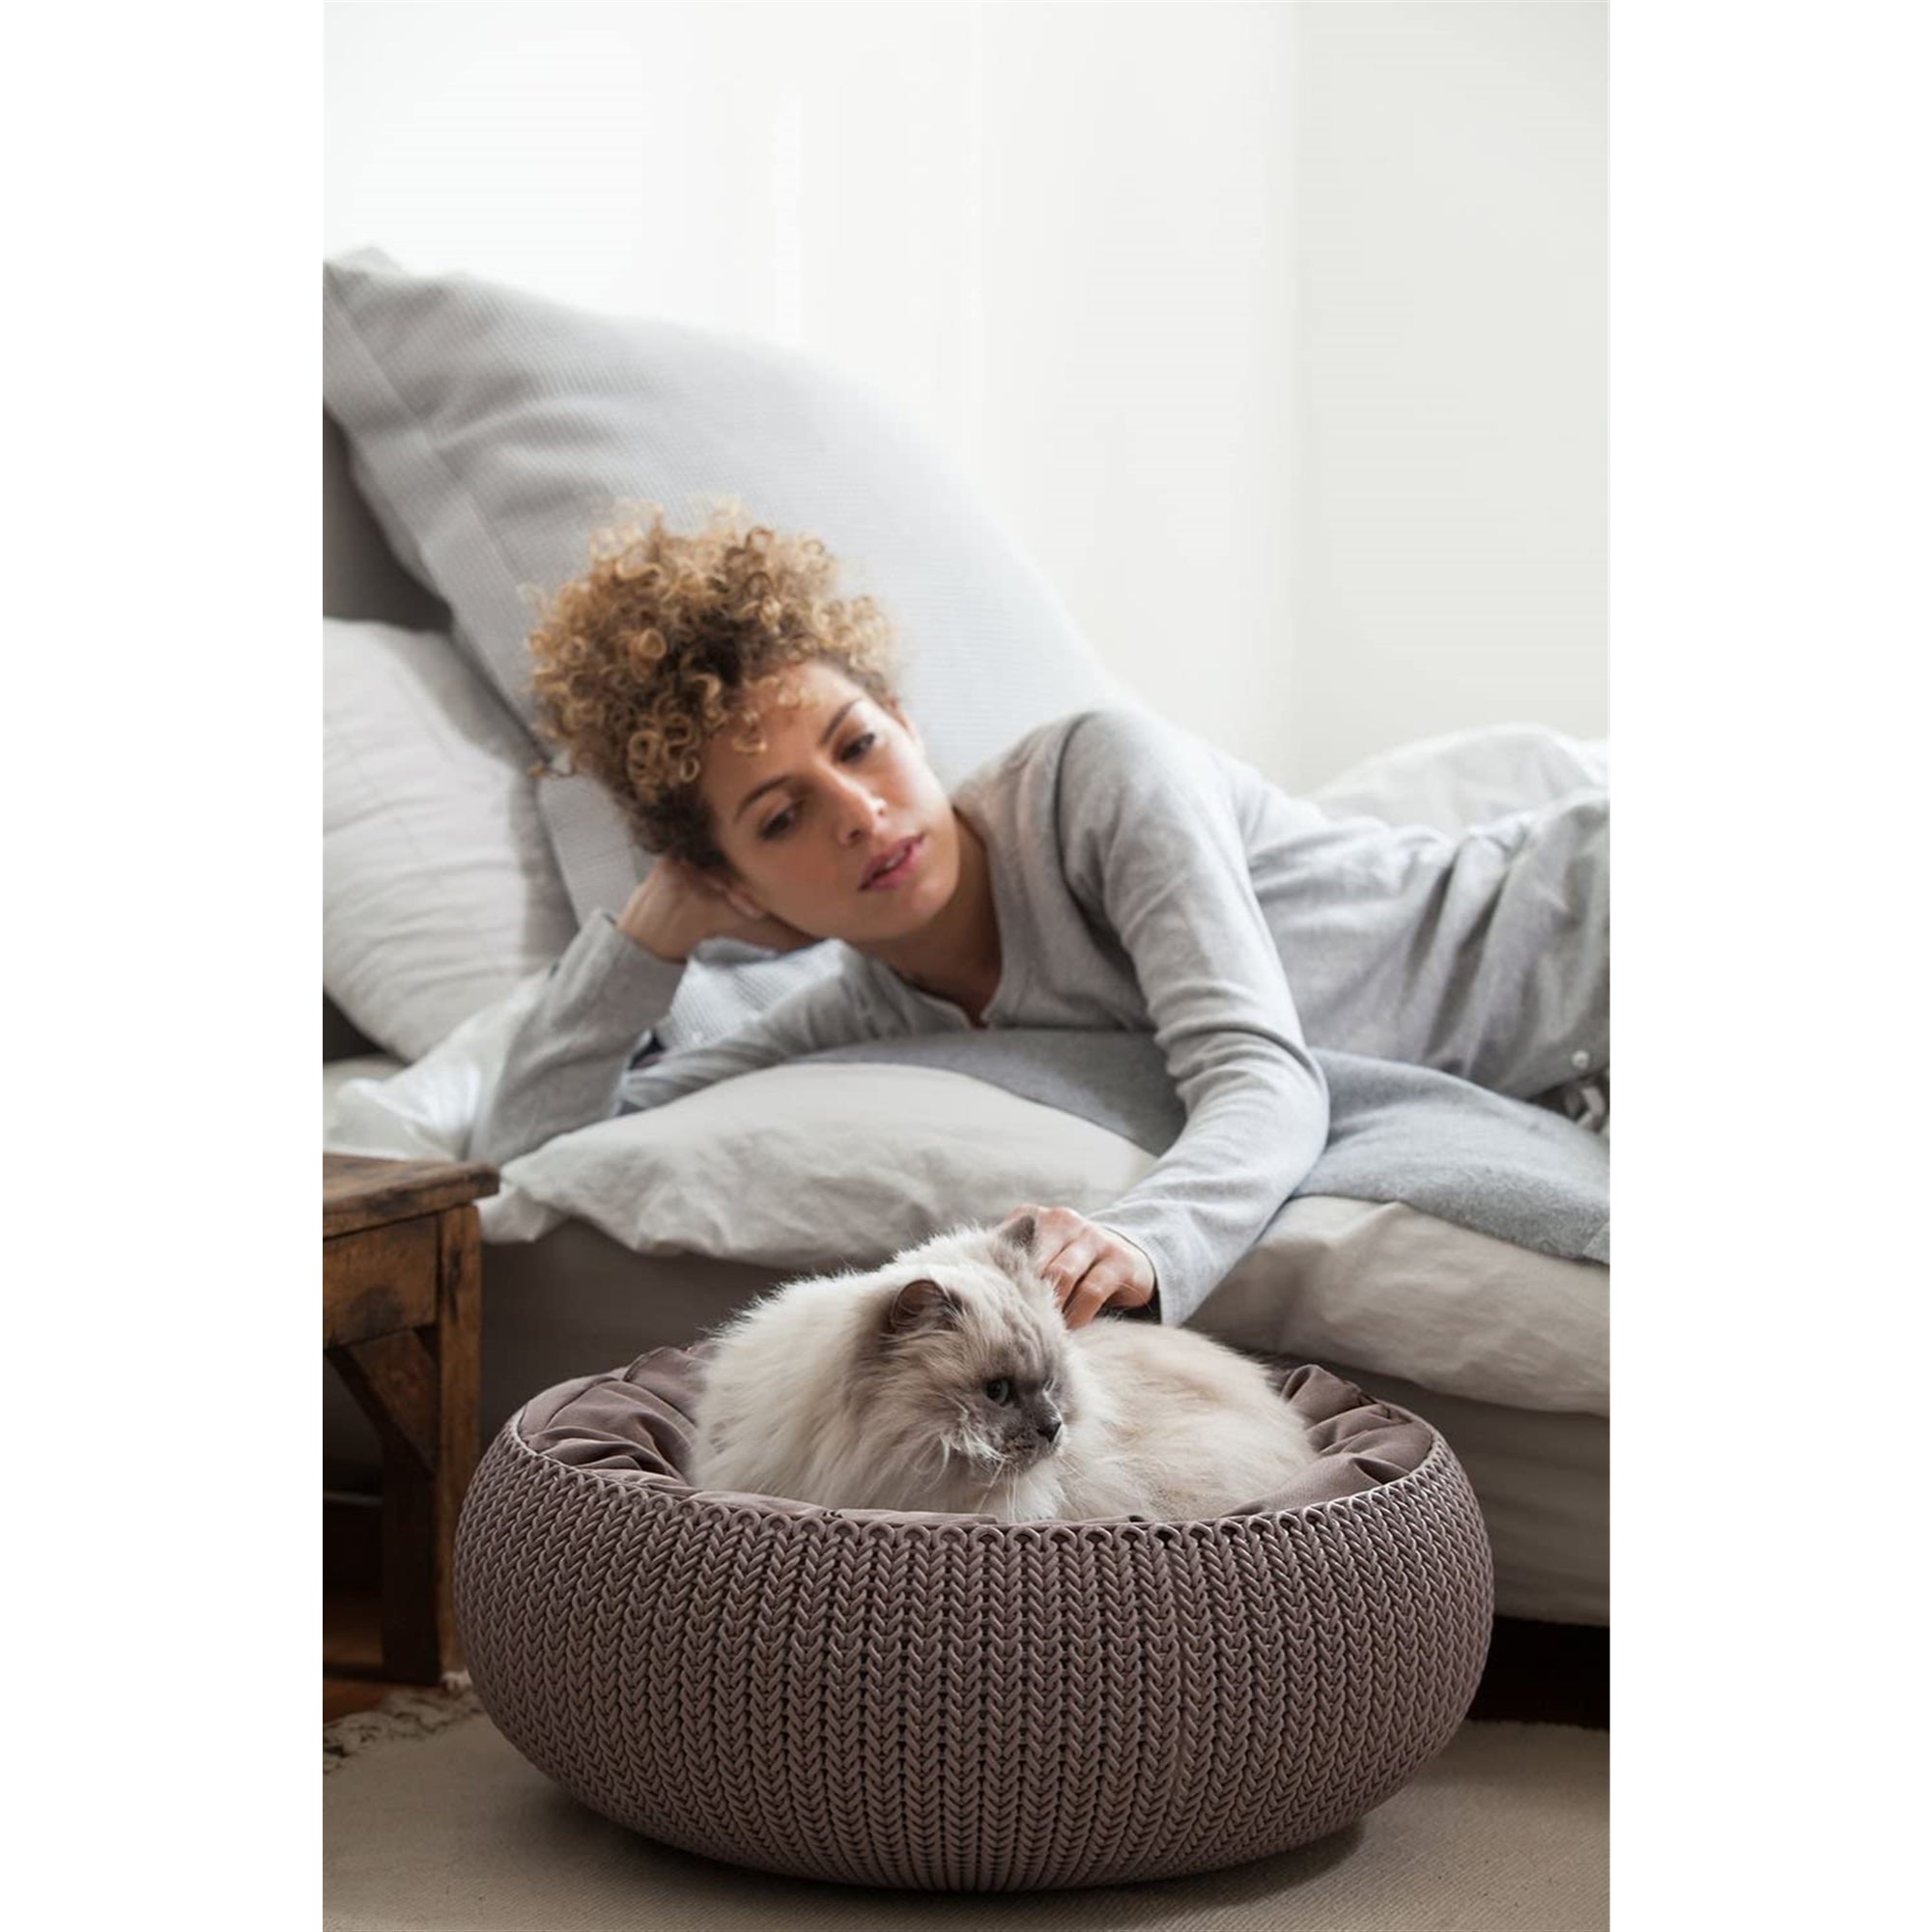 Keter by Curver Knit Cozy Resin Plastic Pet Bed, Cat Bed & Dog Bed with Cushion, Small Dogs to Medium Cats, Sandy Beige